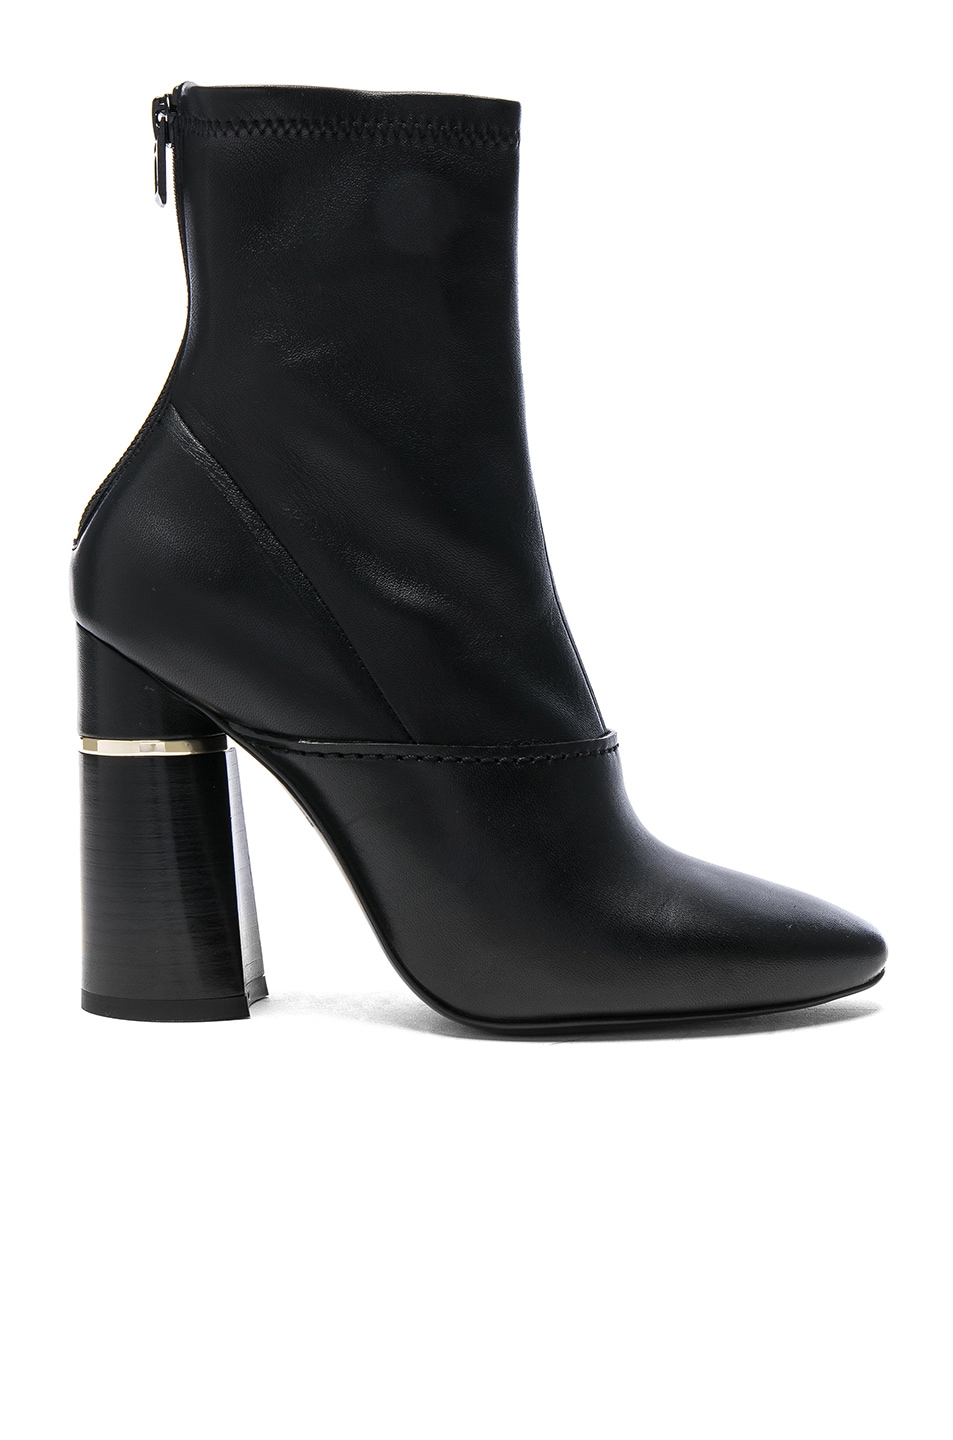 Image 1 of 3.1 phillip lim Kyoto Leather Boots in Black